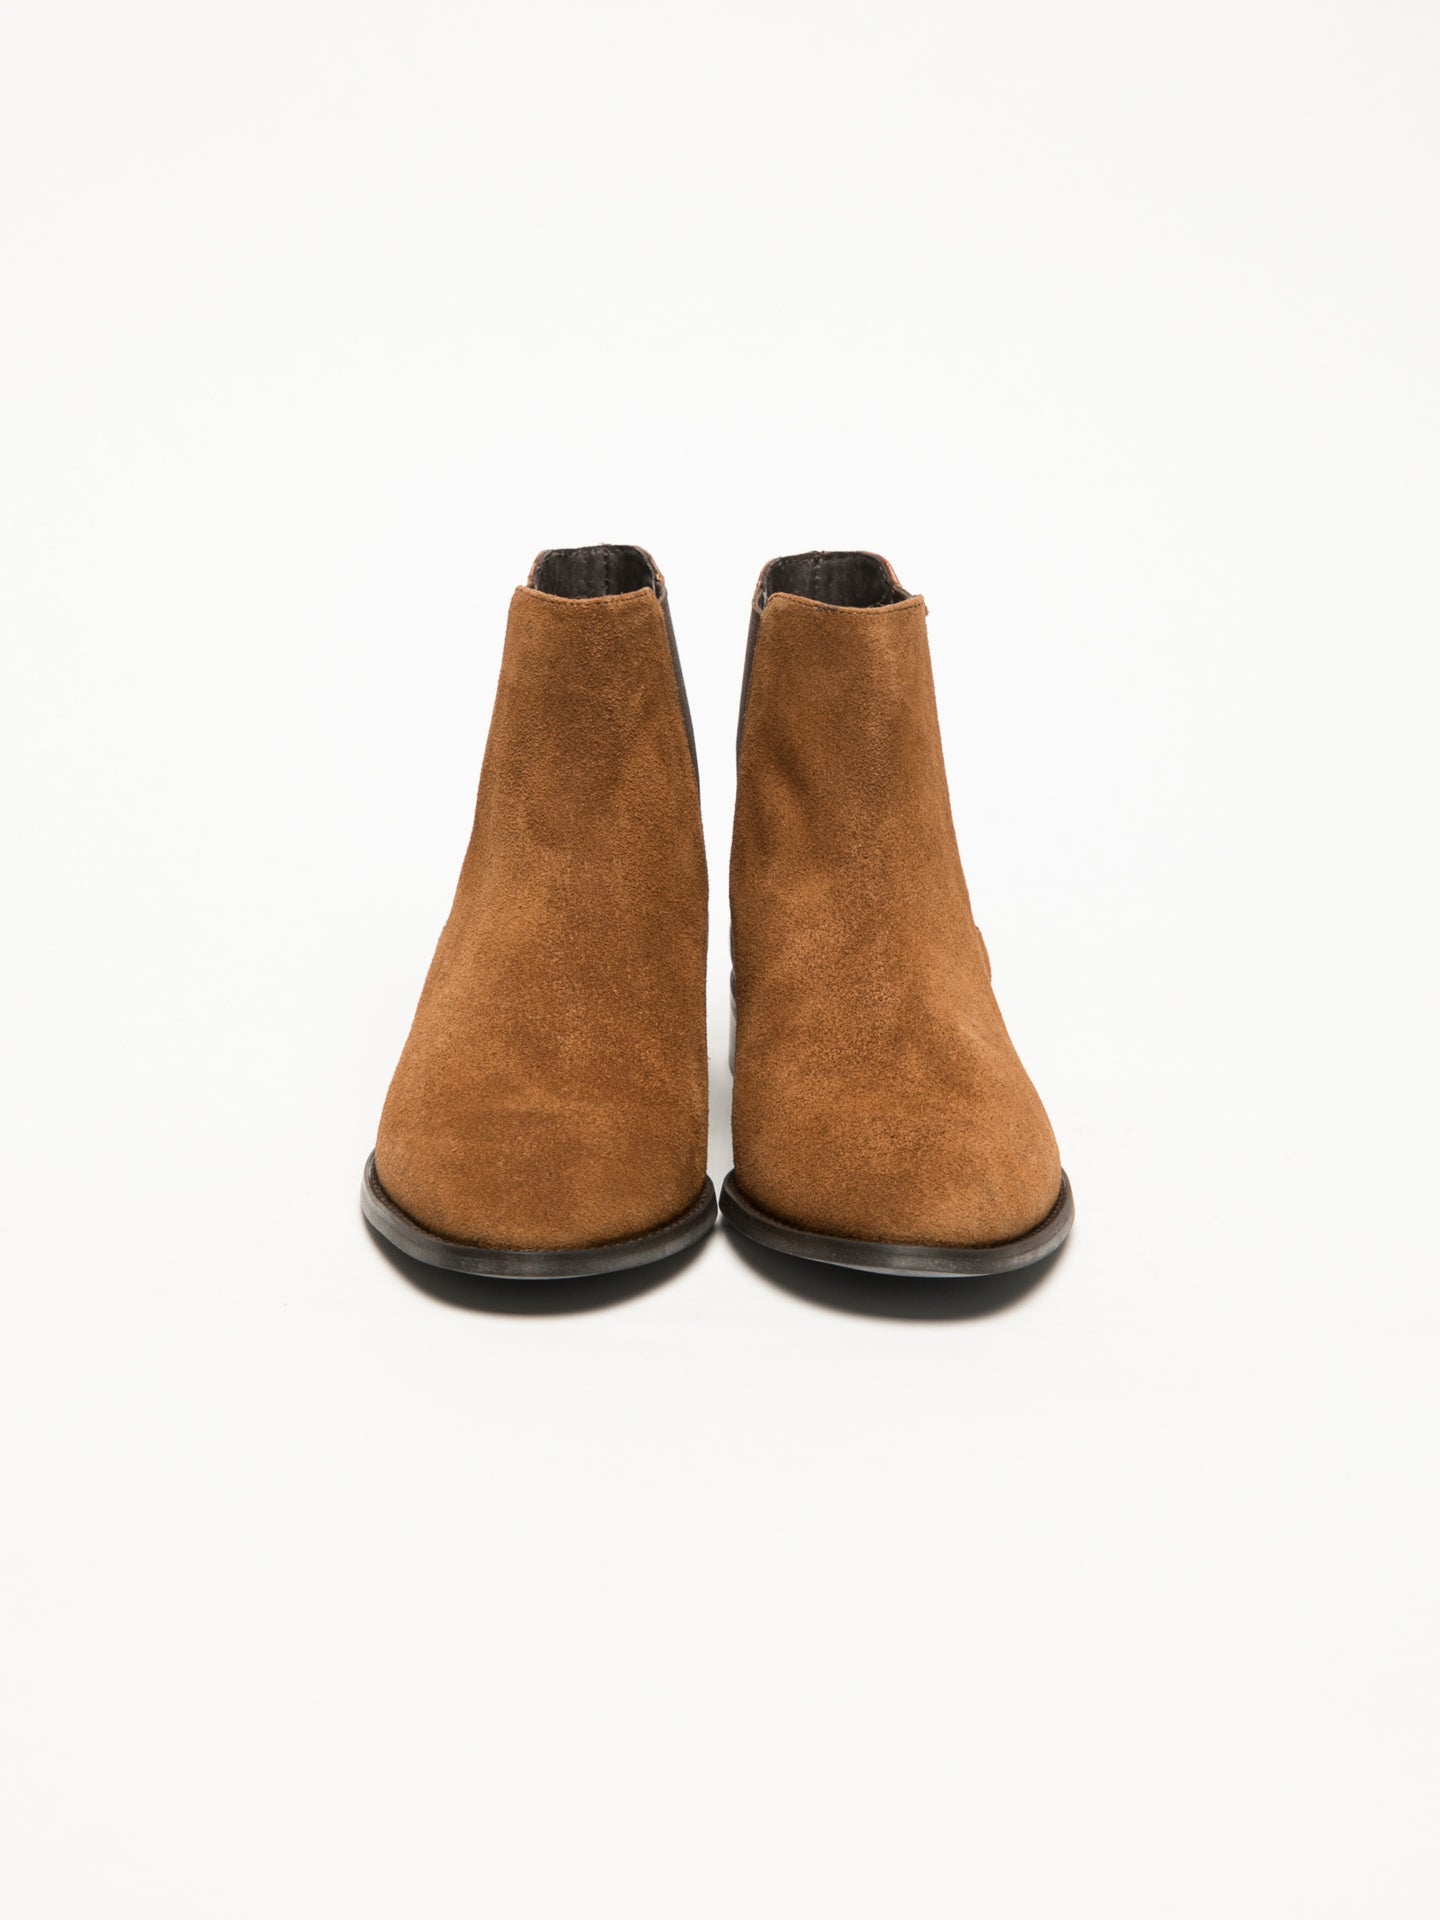 Foreva Brown Chelsea Ankle Boots